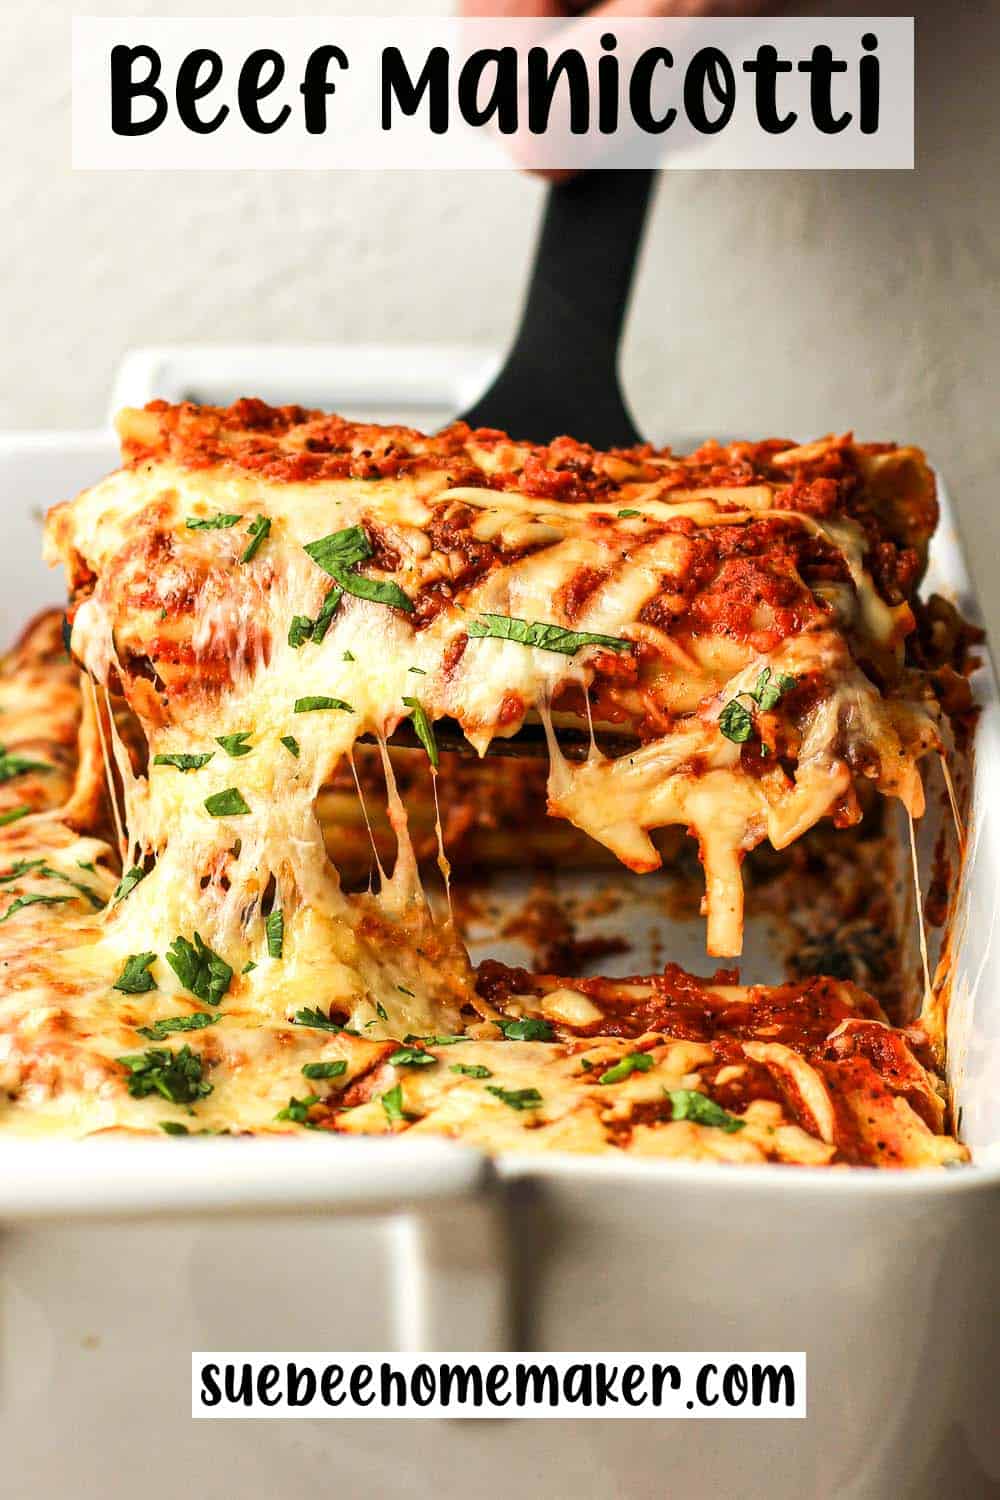 Closeup on a serving of beef manicotti over a casserole dish.